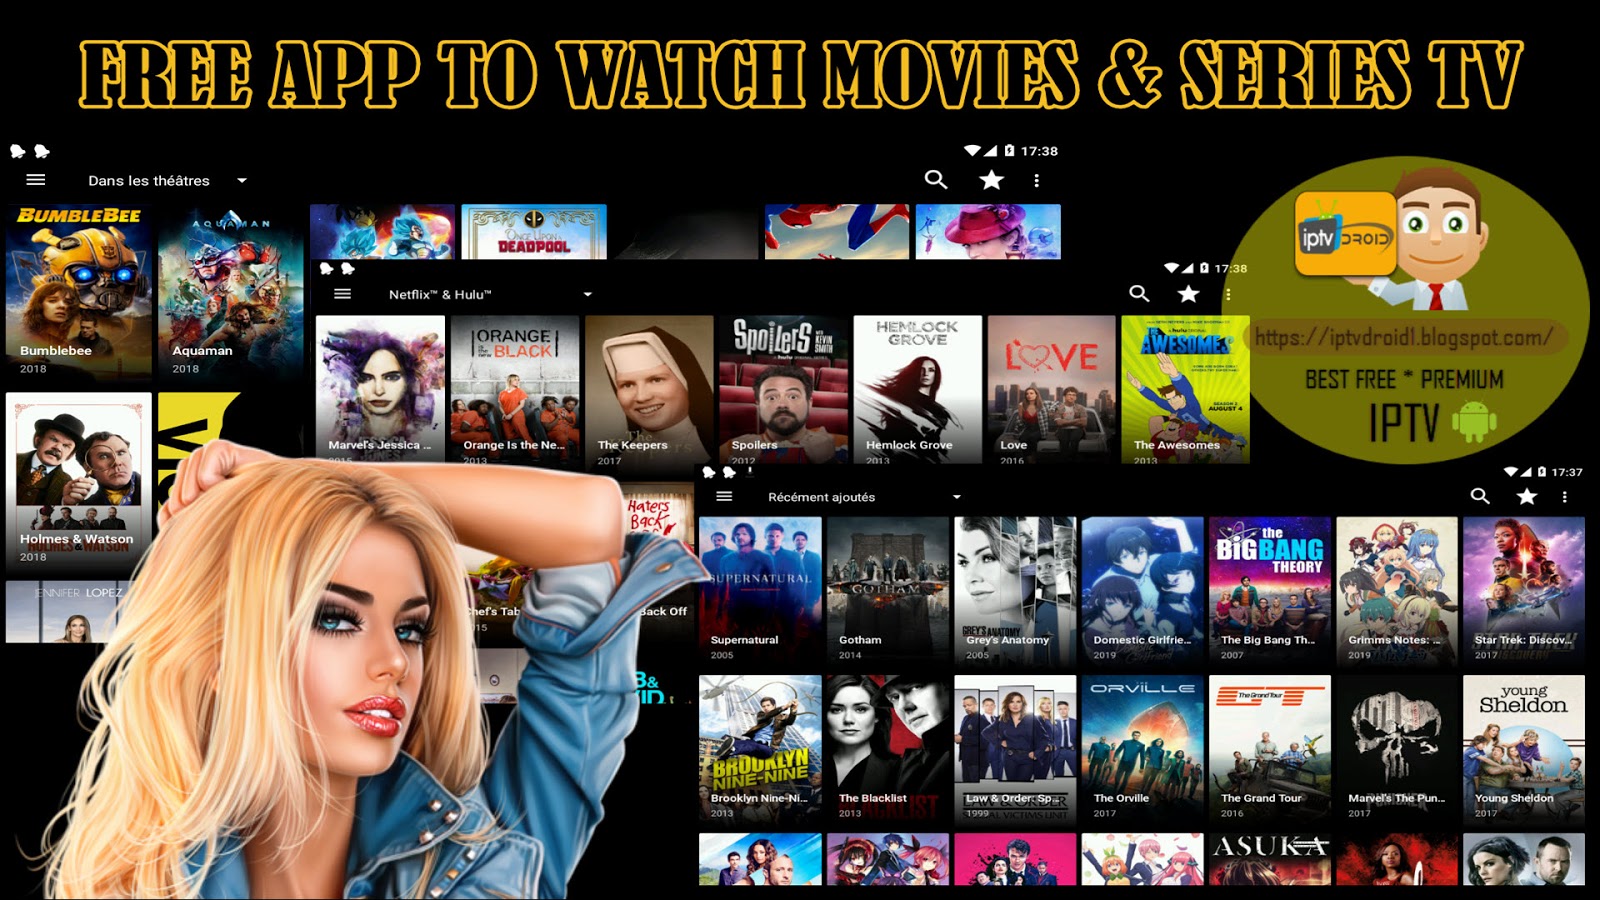 DREAM TV BEST FREE APP TO WATCH YOUR FAVORITE MOVIES AND